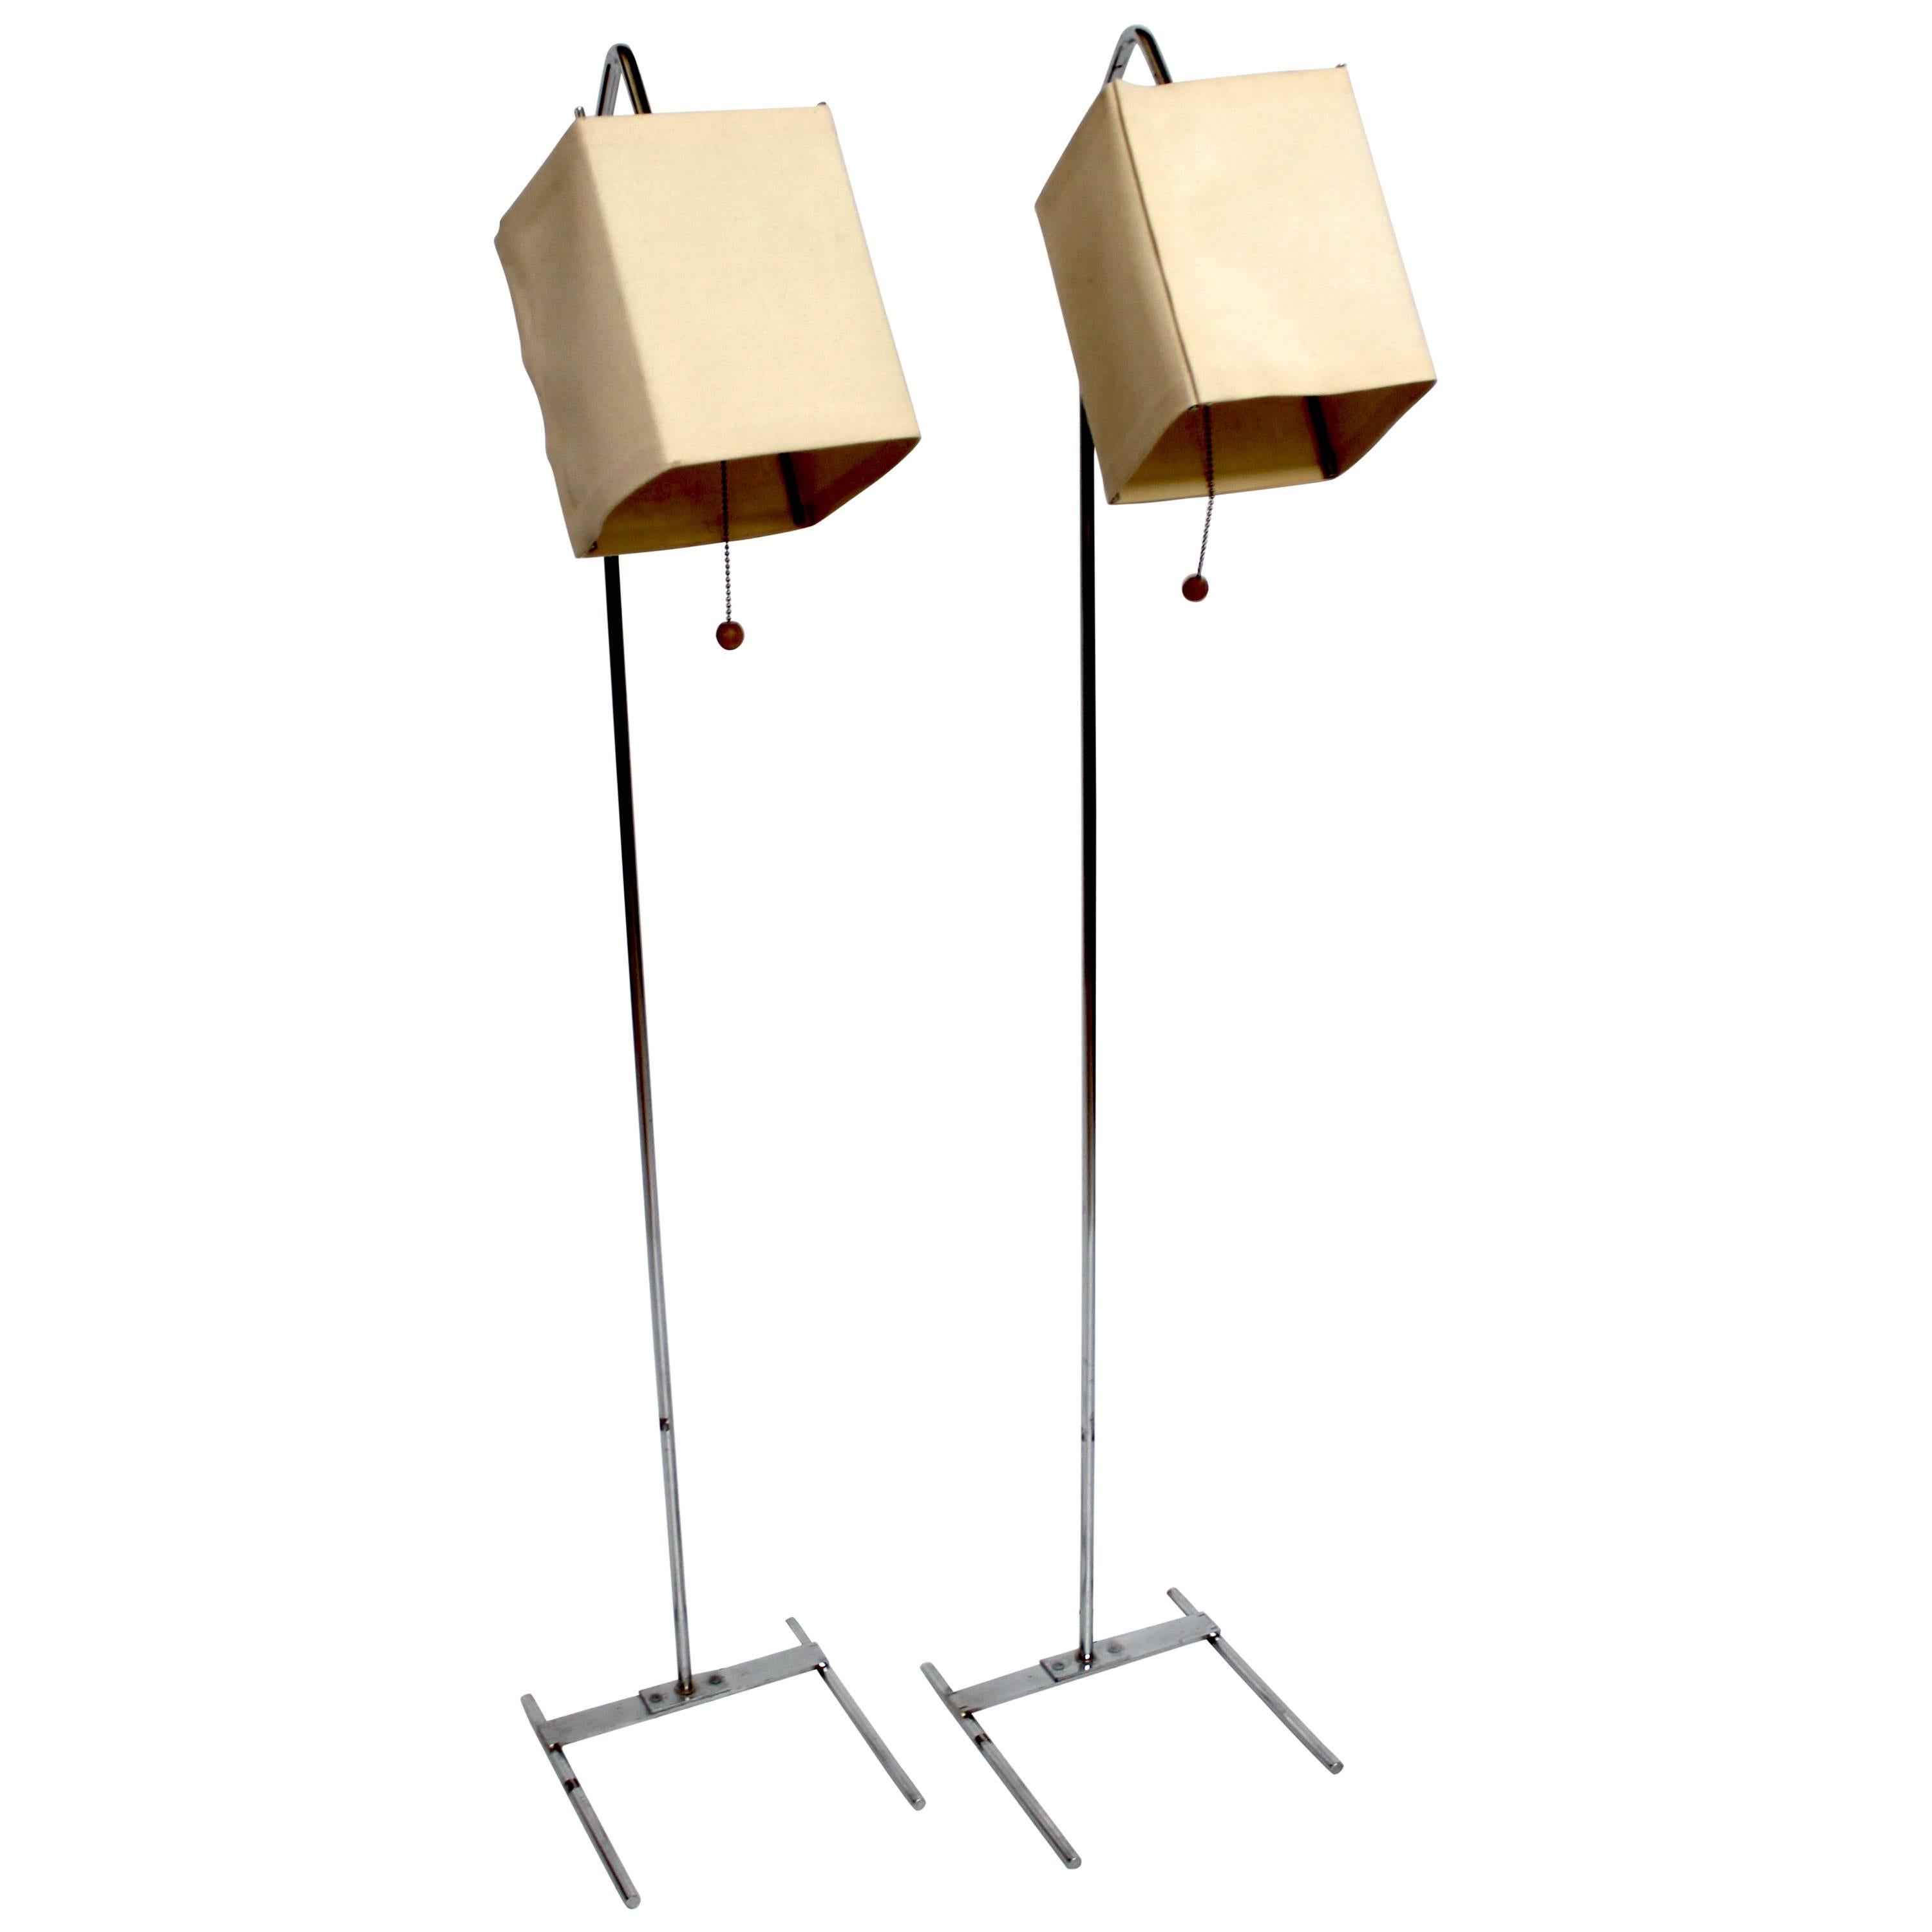 Pair of George Nelson "Kite" Floor Lamps, circa 1960 For Sale